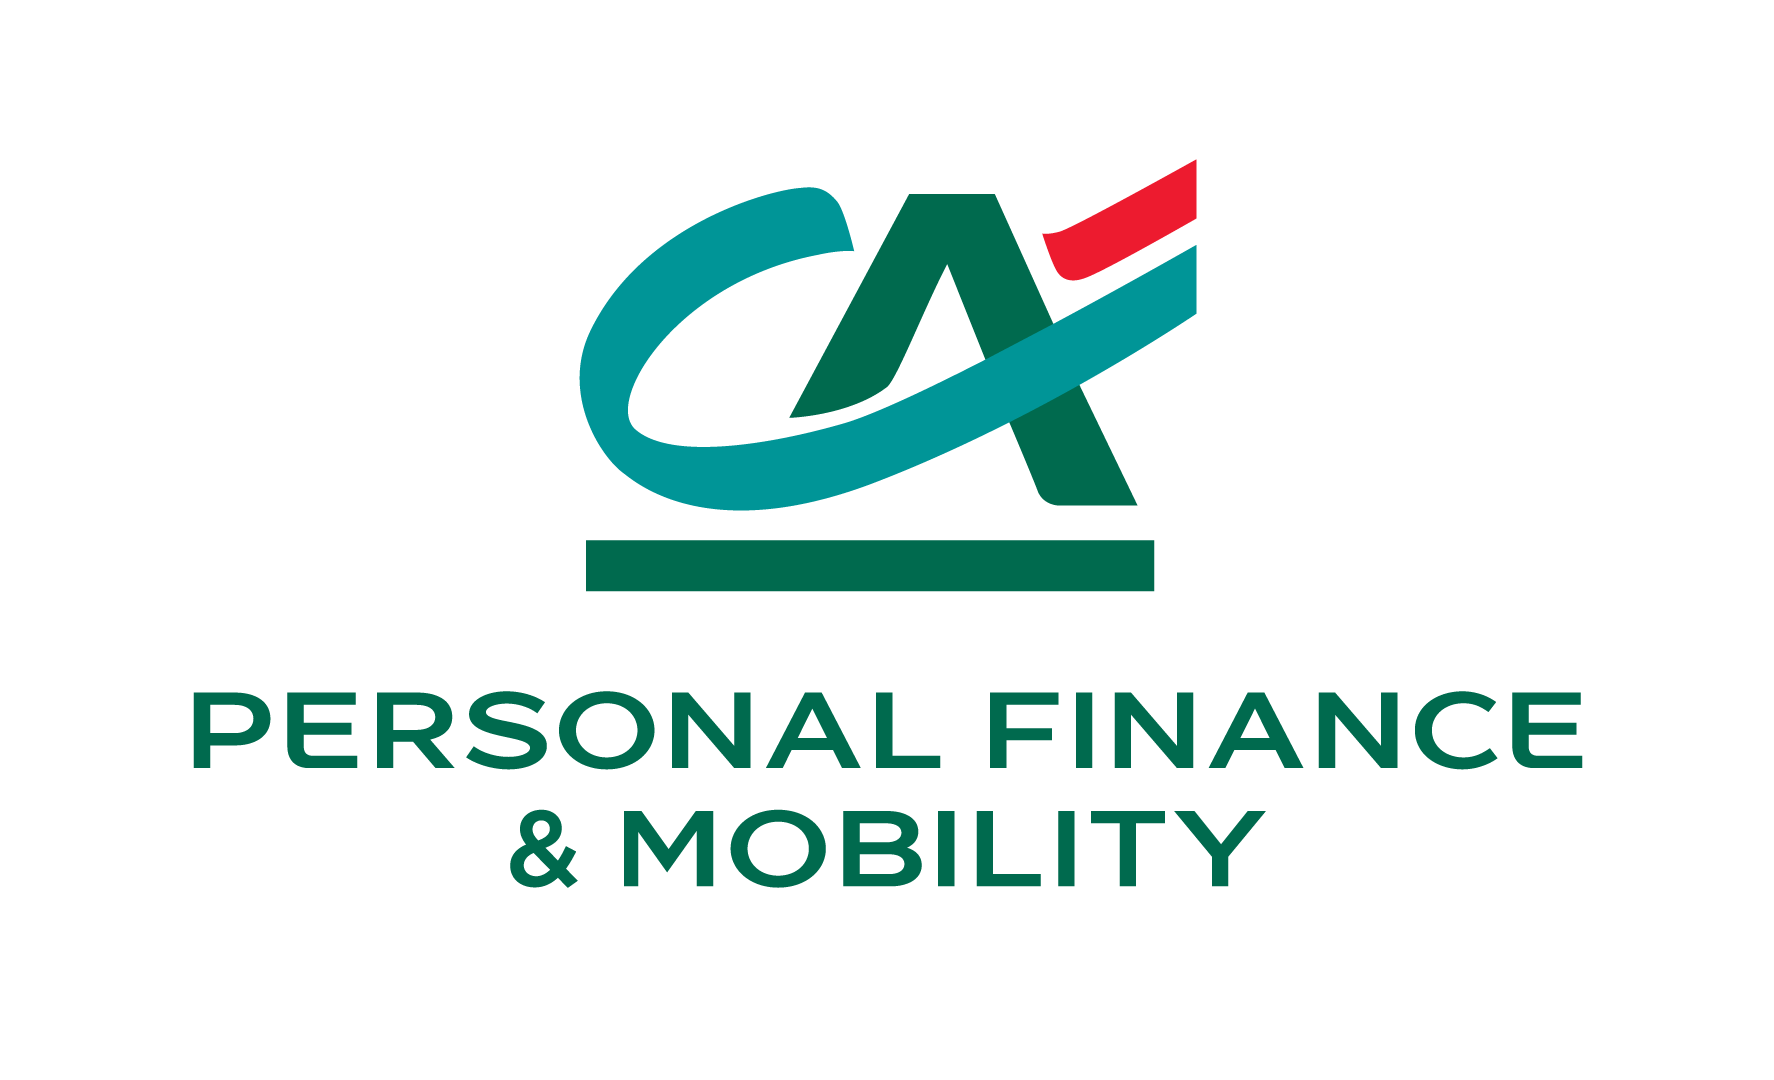 Credit Agricole Personal Finance & Mobility - FPF